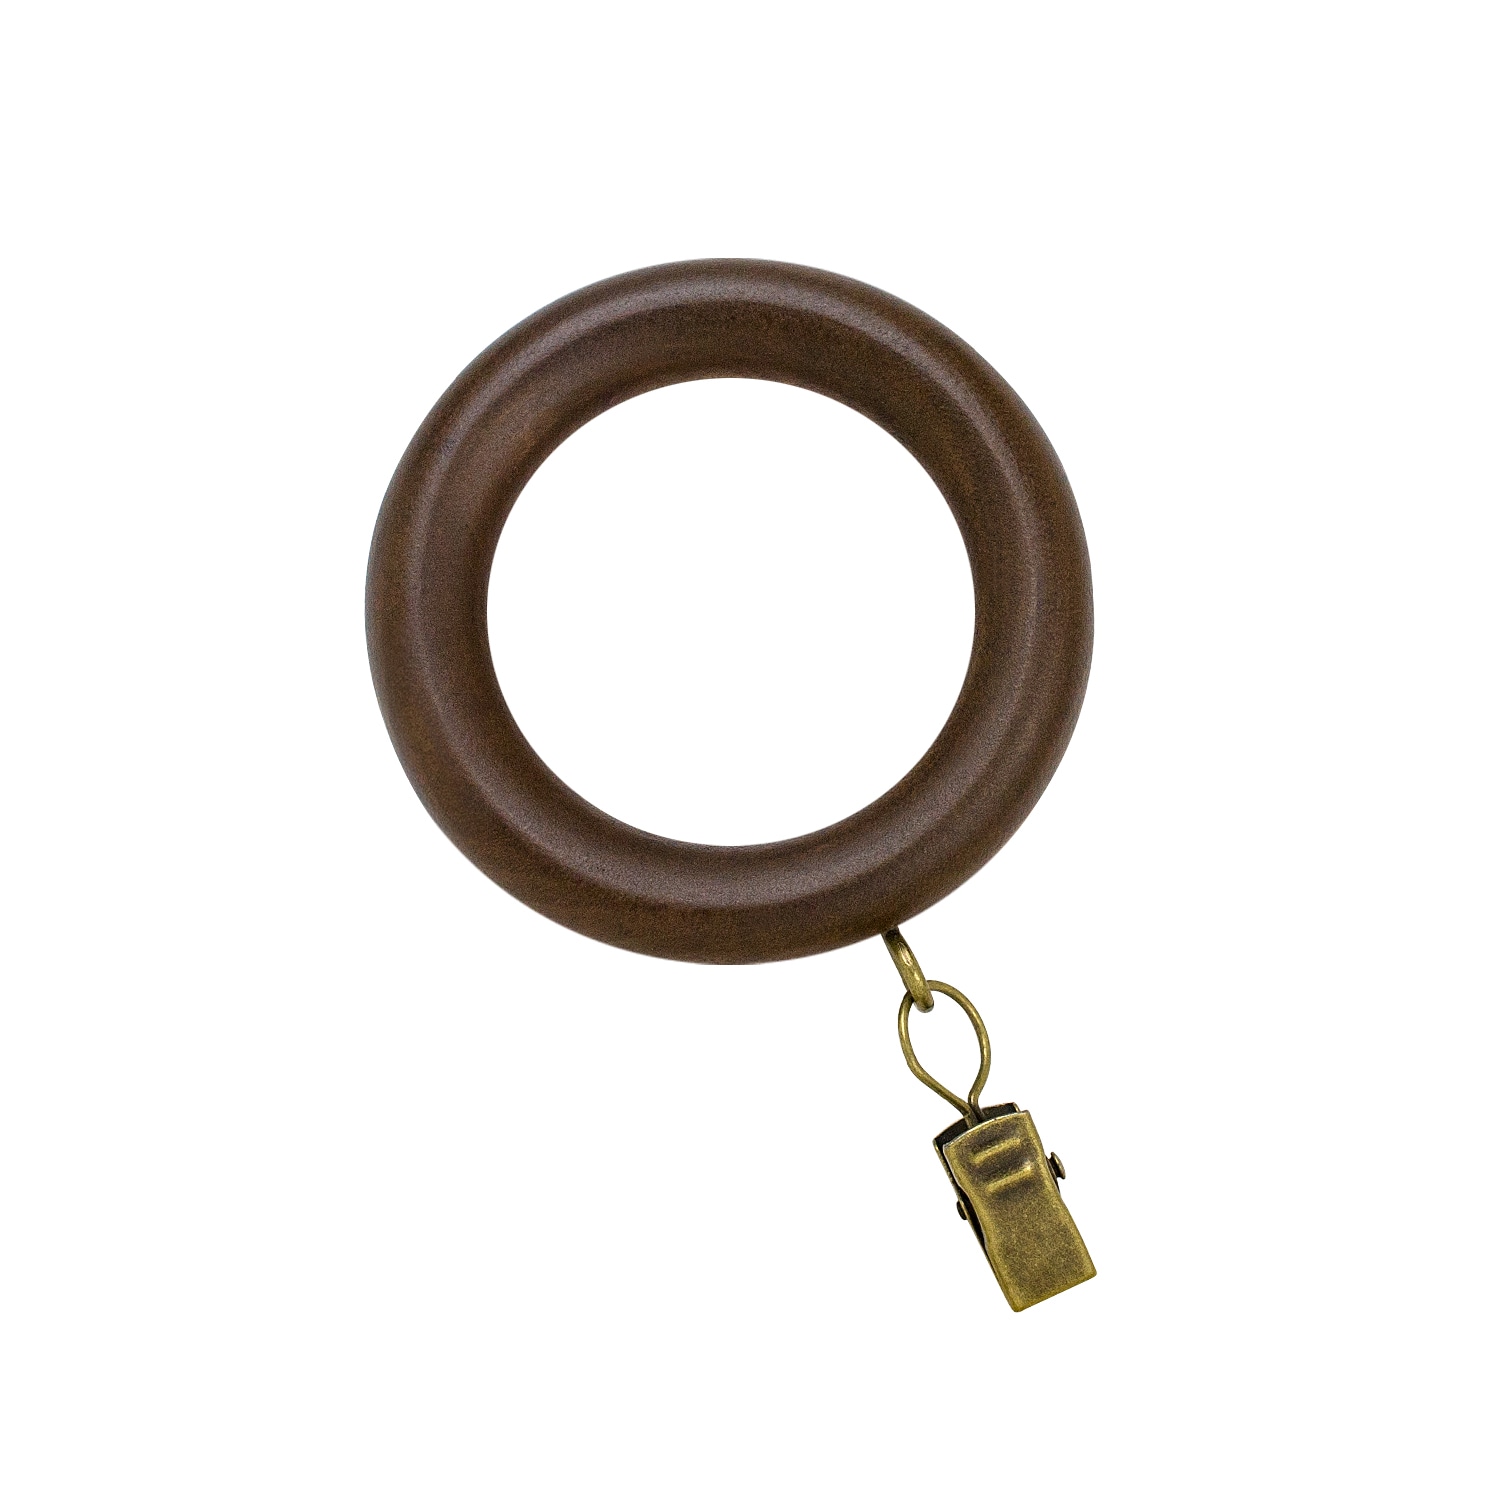 LARGE CURTAIN WOOD POLE RING DRAPE RINGS BROWN COLOUR 